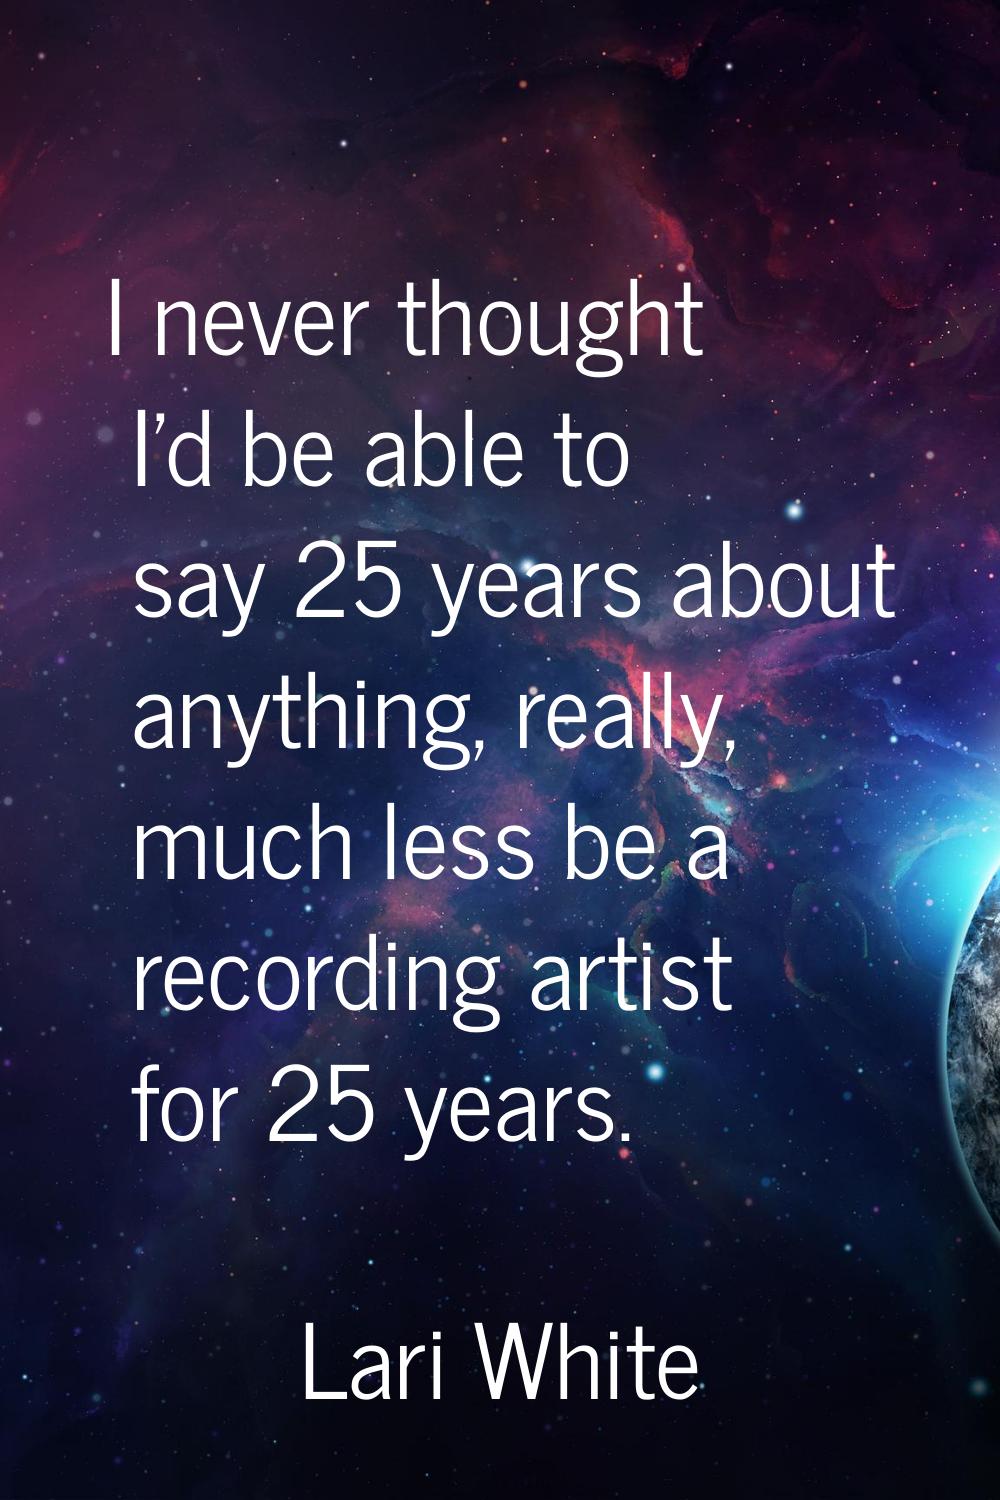 I never thought I'd be able to say 25 years about anything, really, much less be a recording artist